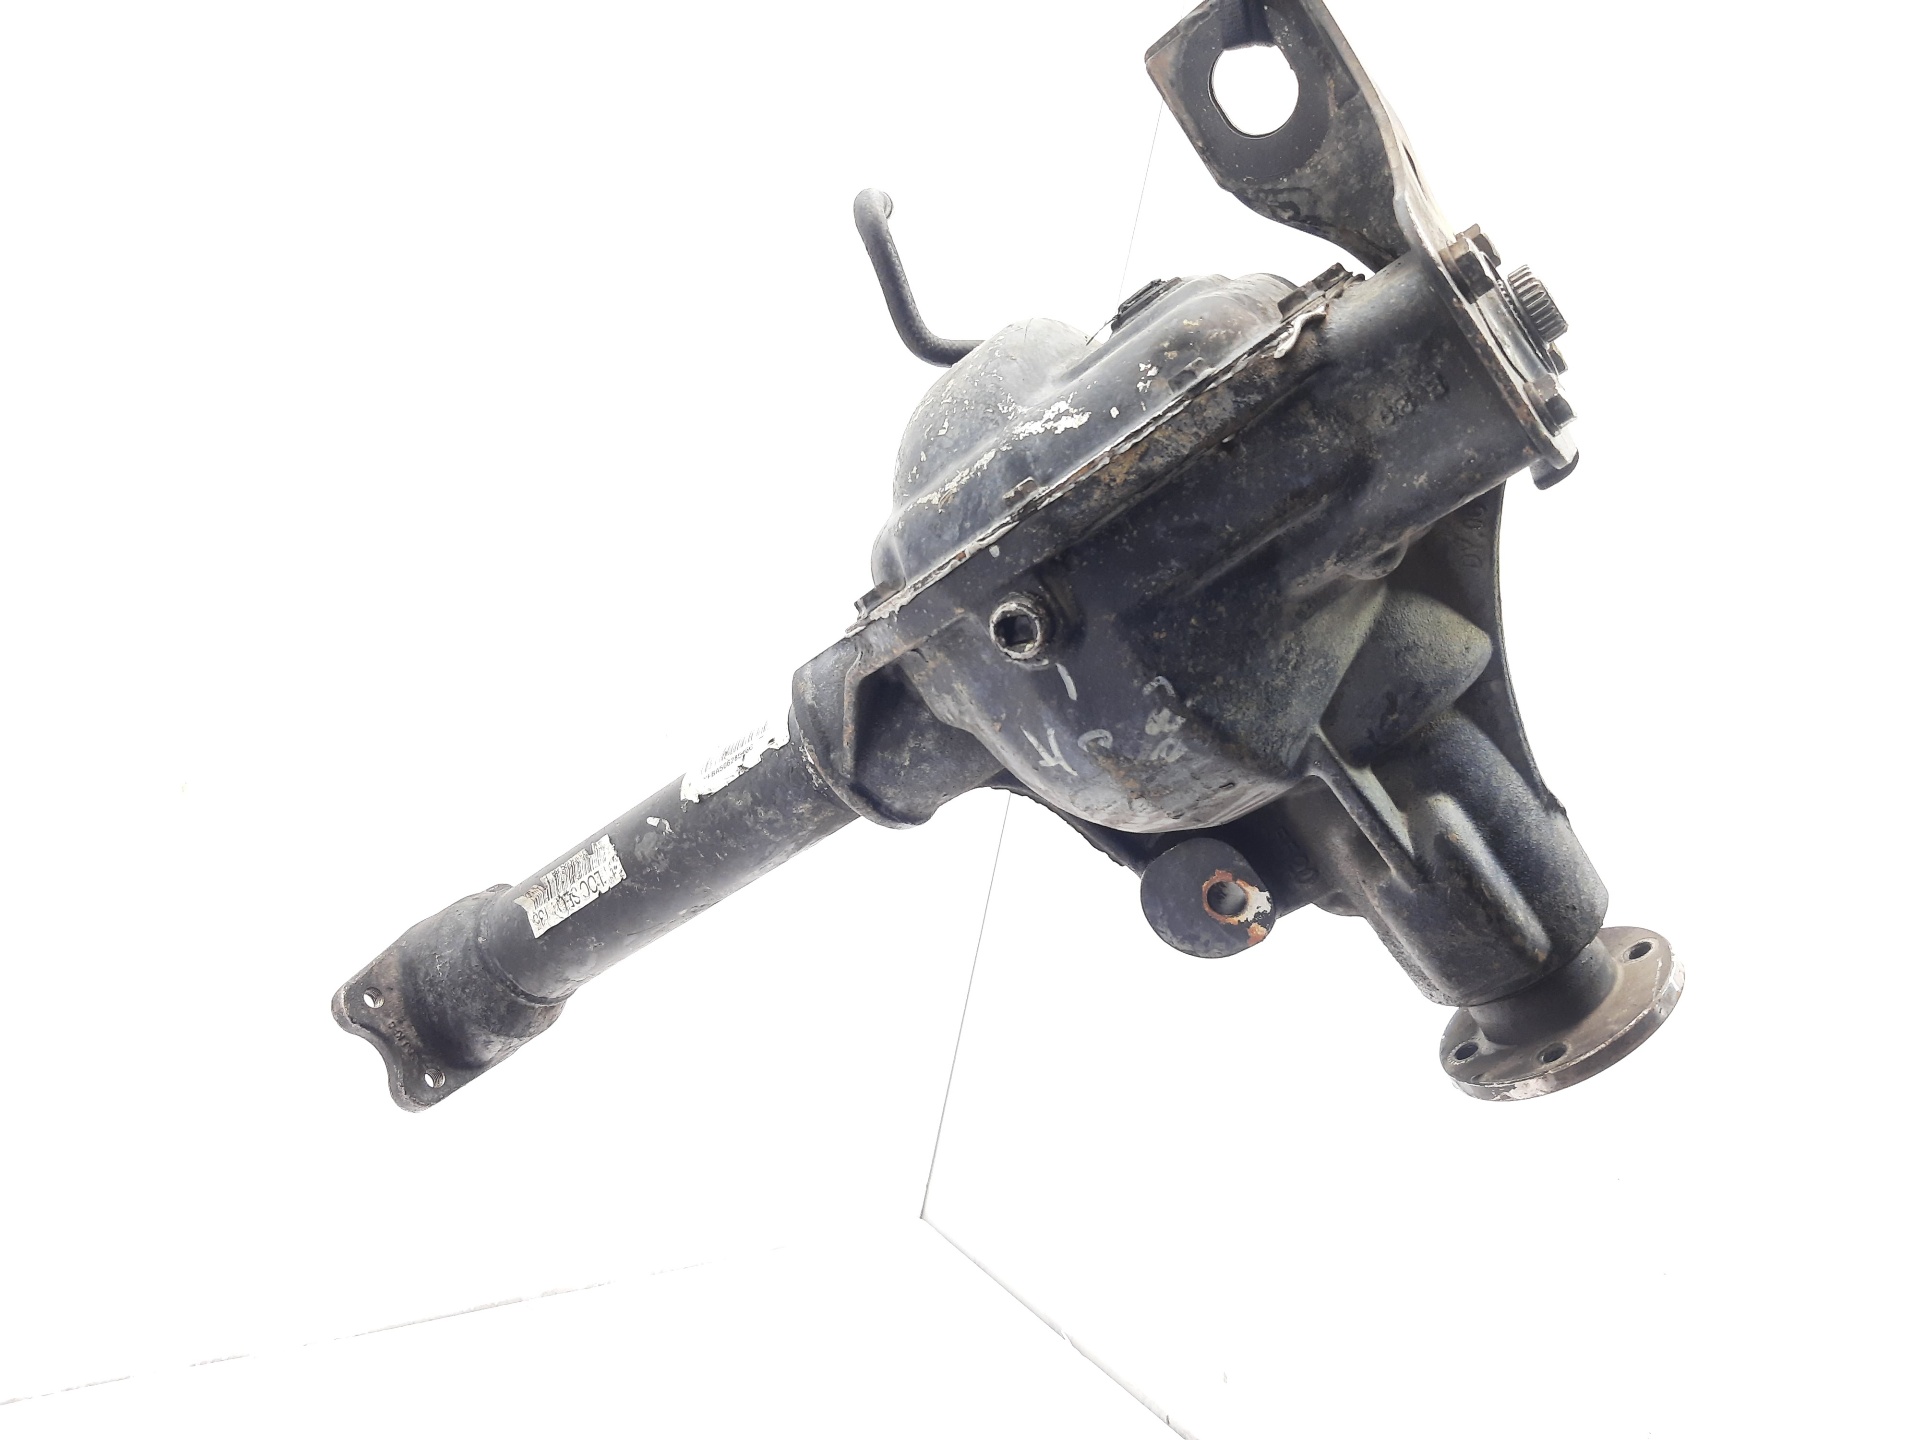 SSANGYONG Rexton Y200 (2001-2007) Front Transfer Case YFBA50628546C 24152108